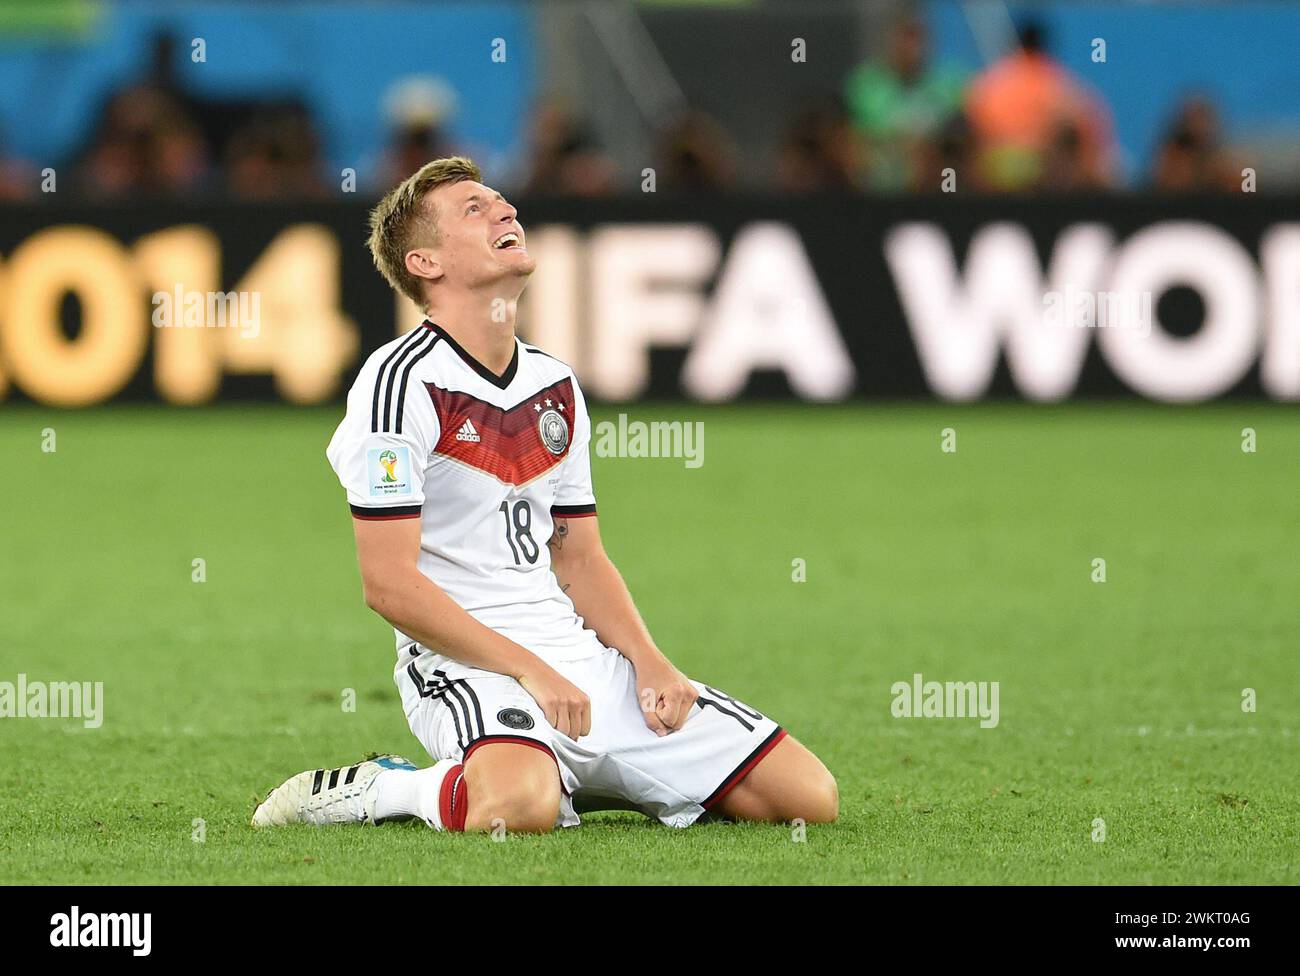 Rio De Janeiro, Brazil. 13th July, 2014. Soccer: World Cup 2014, Final, Argentina - Germany. Germany's Toni Kroos kneels on the pitch after the World Cup victory. Around three years after his retirement, Toni Kroos will once again play for the German national soccer team. Following a request from national coach Nagelsmann, he will 'play for Germany again from March', the 34-year-old Real Madrid midfielder announced on Instagram. Credit: dpa/Alamy Live News Stock Photo